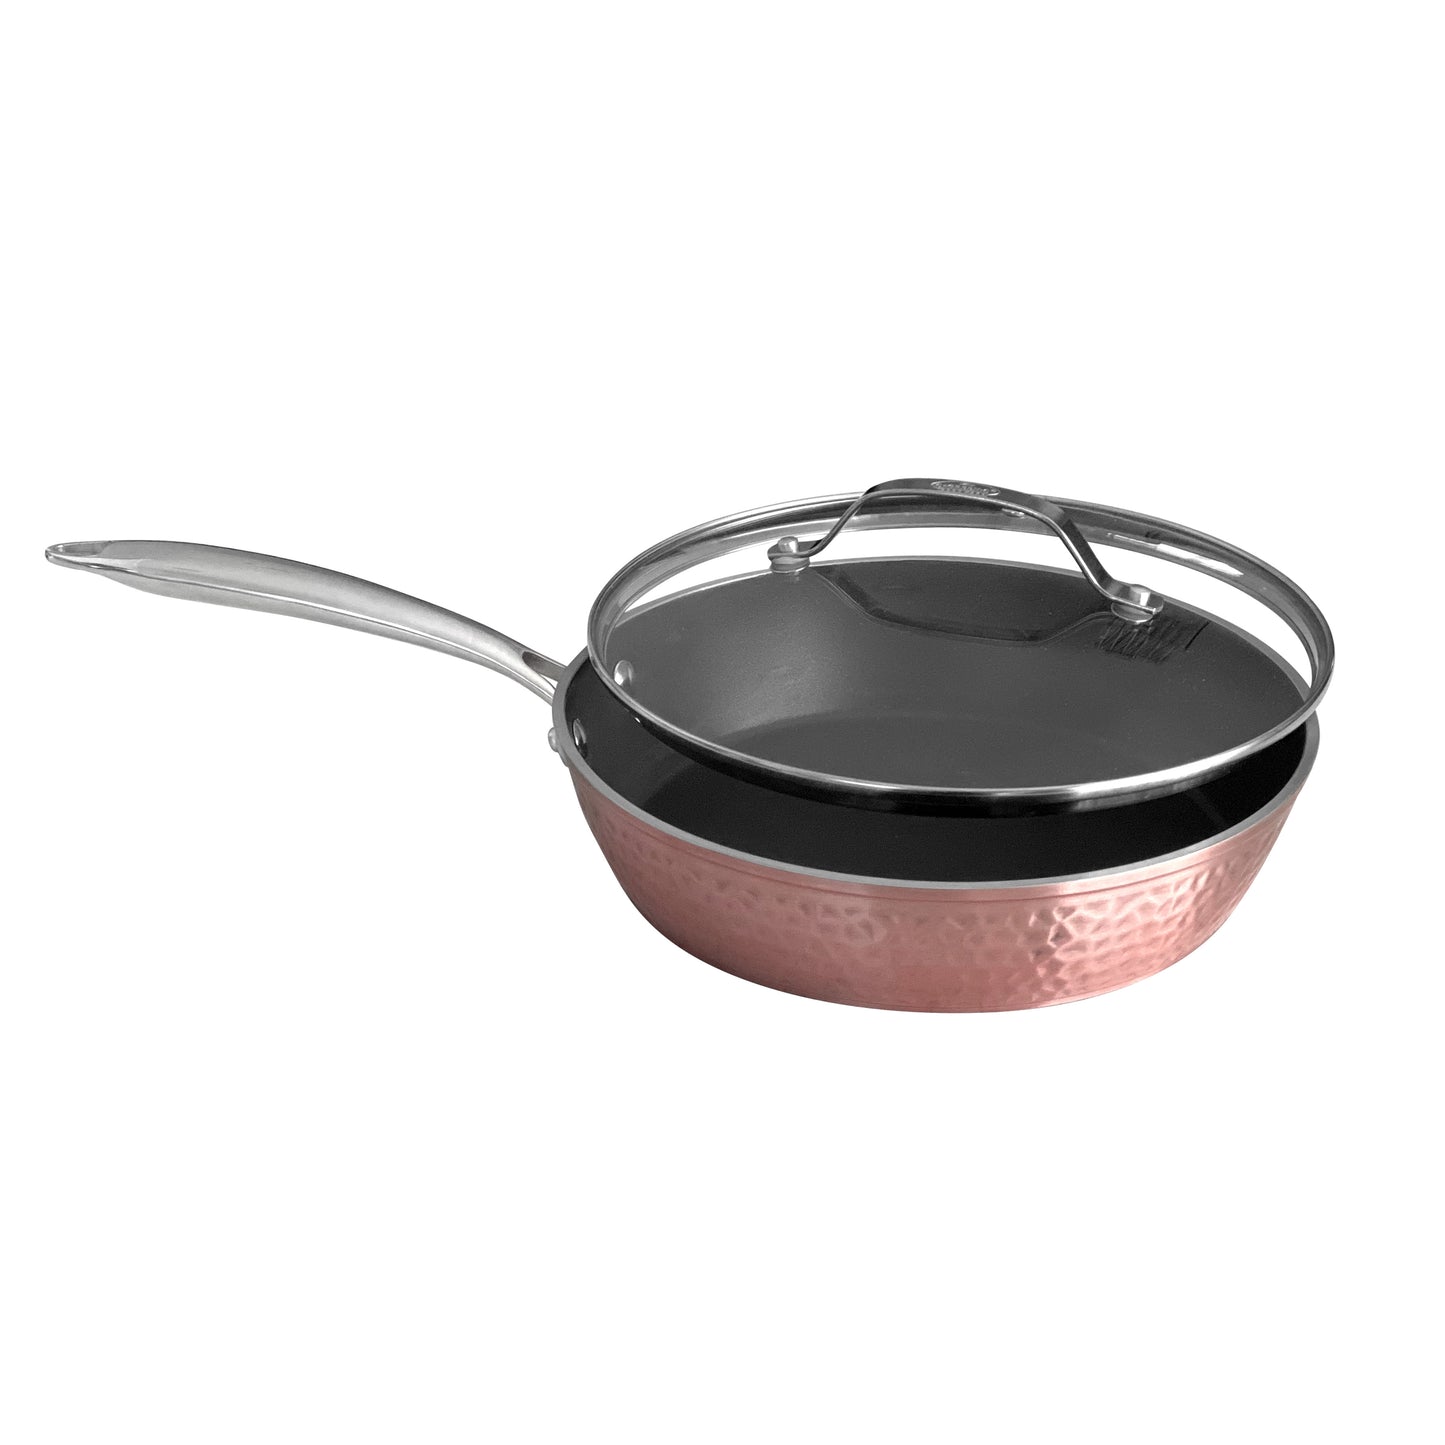 Hammered Rose Gold 12" Pan with Glass Lid